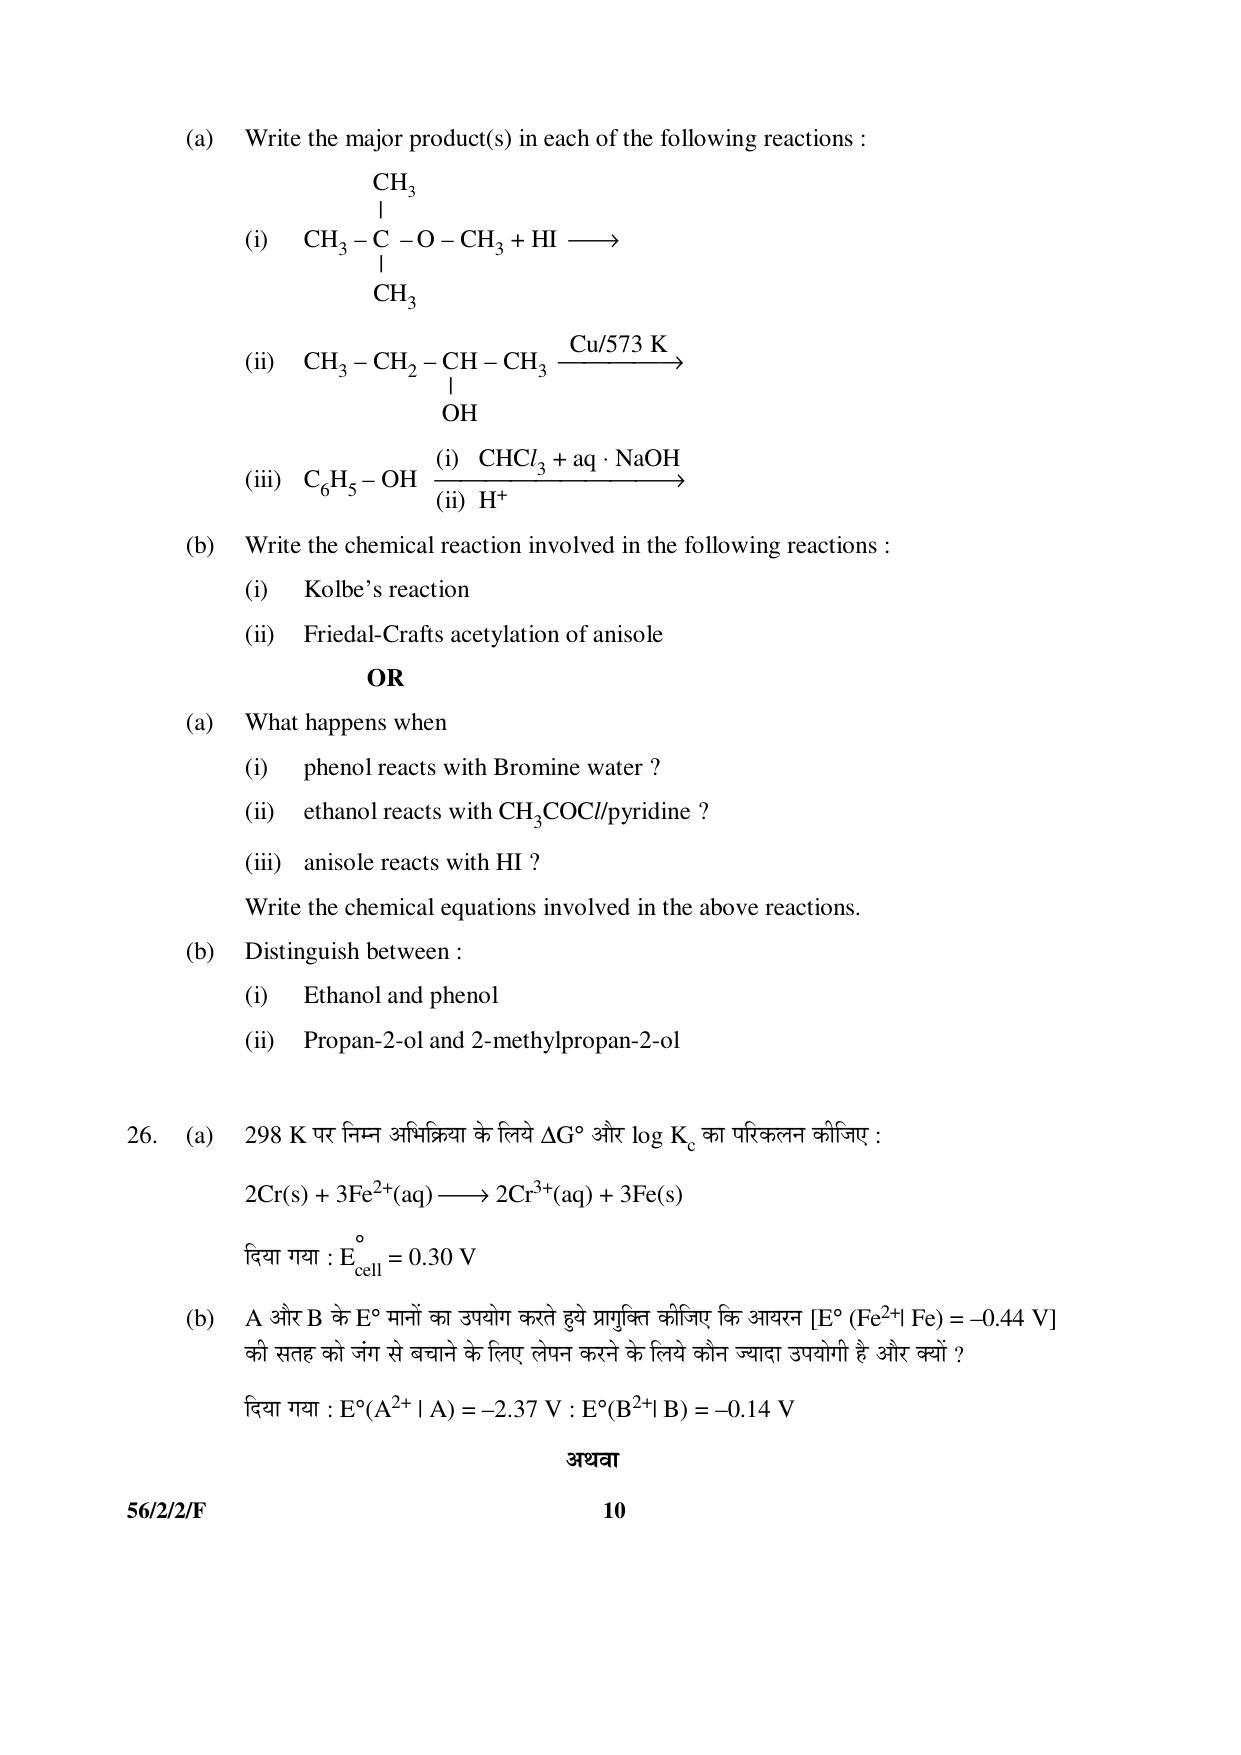 CBSE Class 12 56-2-2-F _Chemistry_ 2016 Question Paper - Page 10